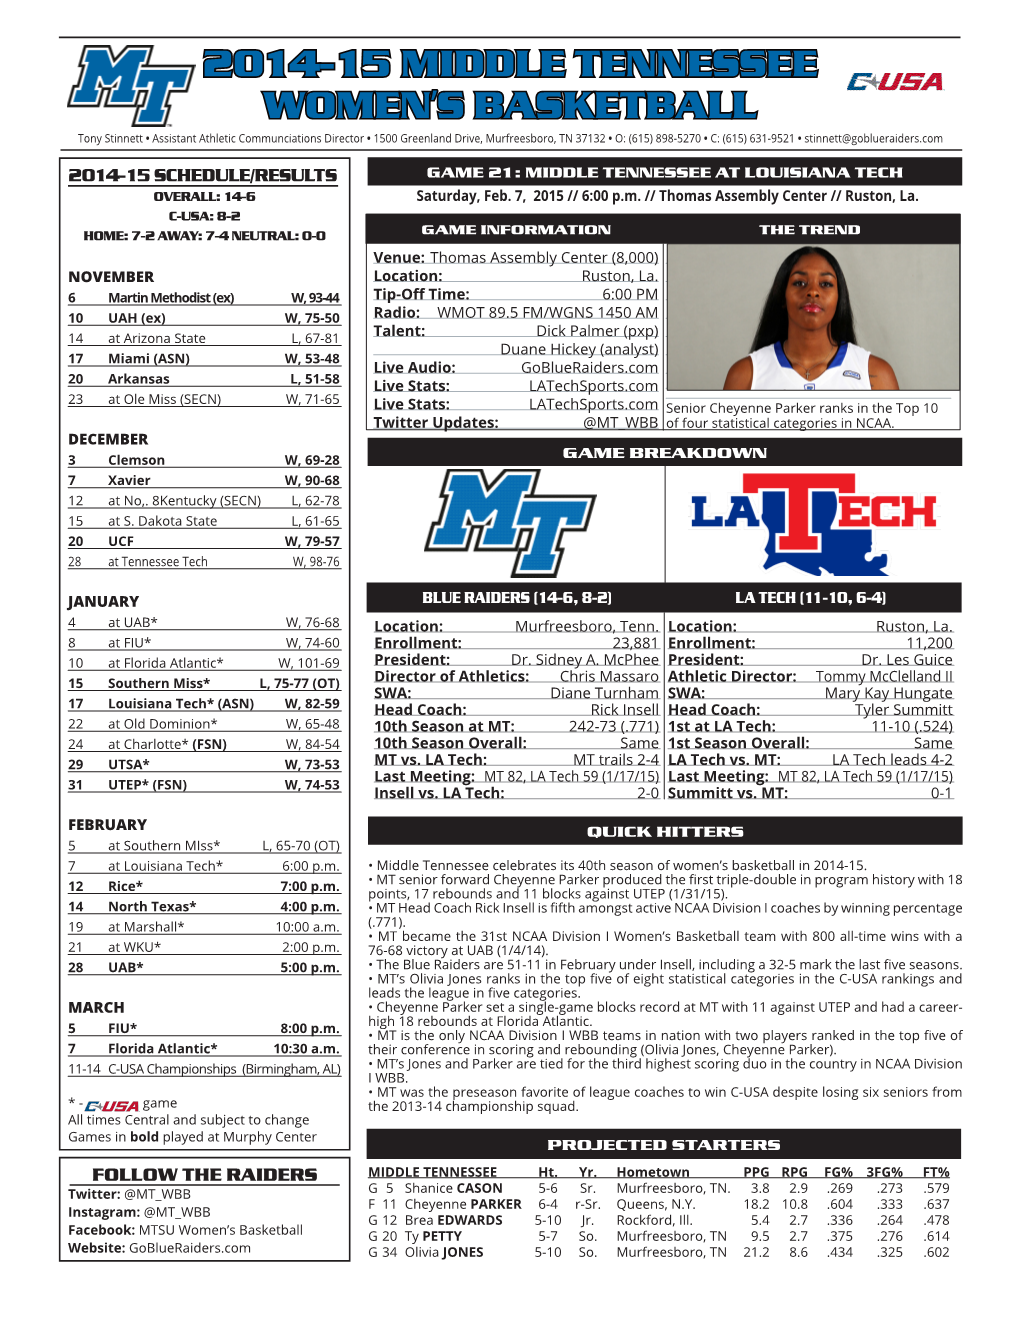 2014-15 Middle Tennessee Women's Basketball